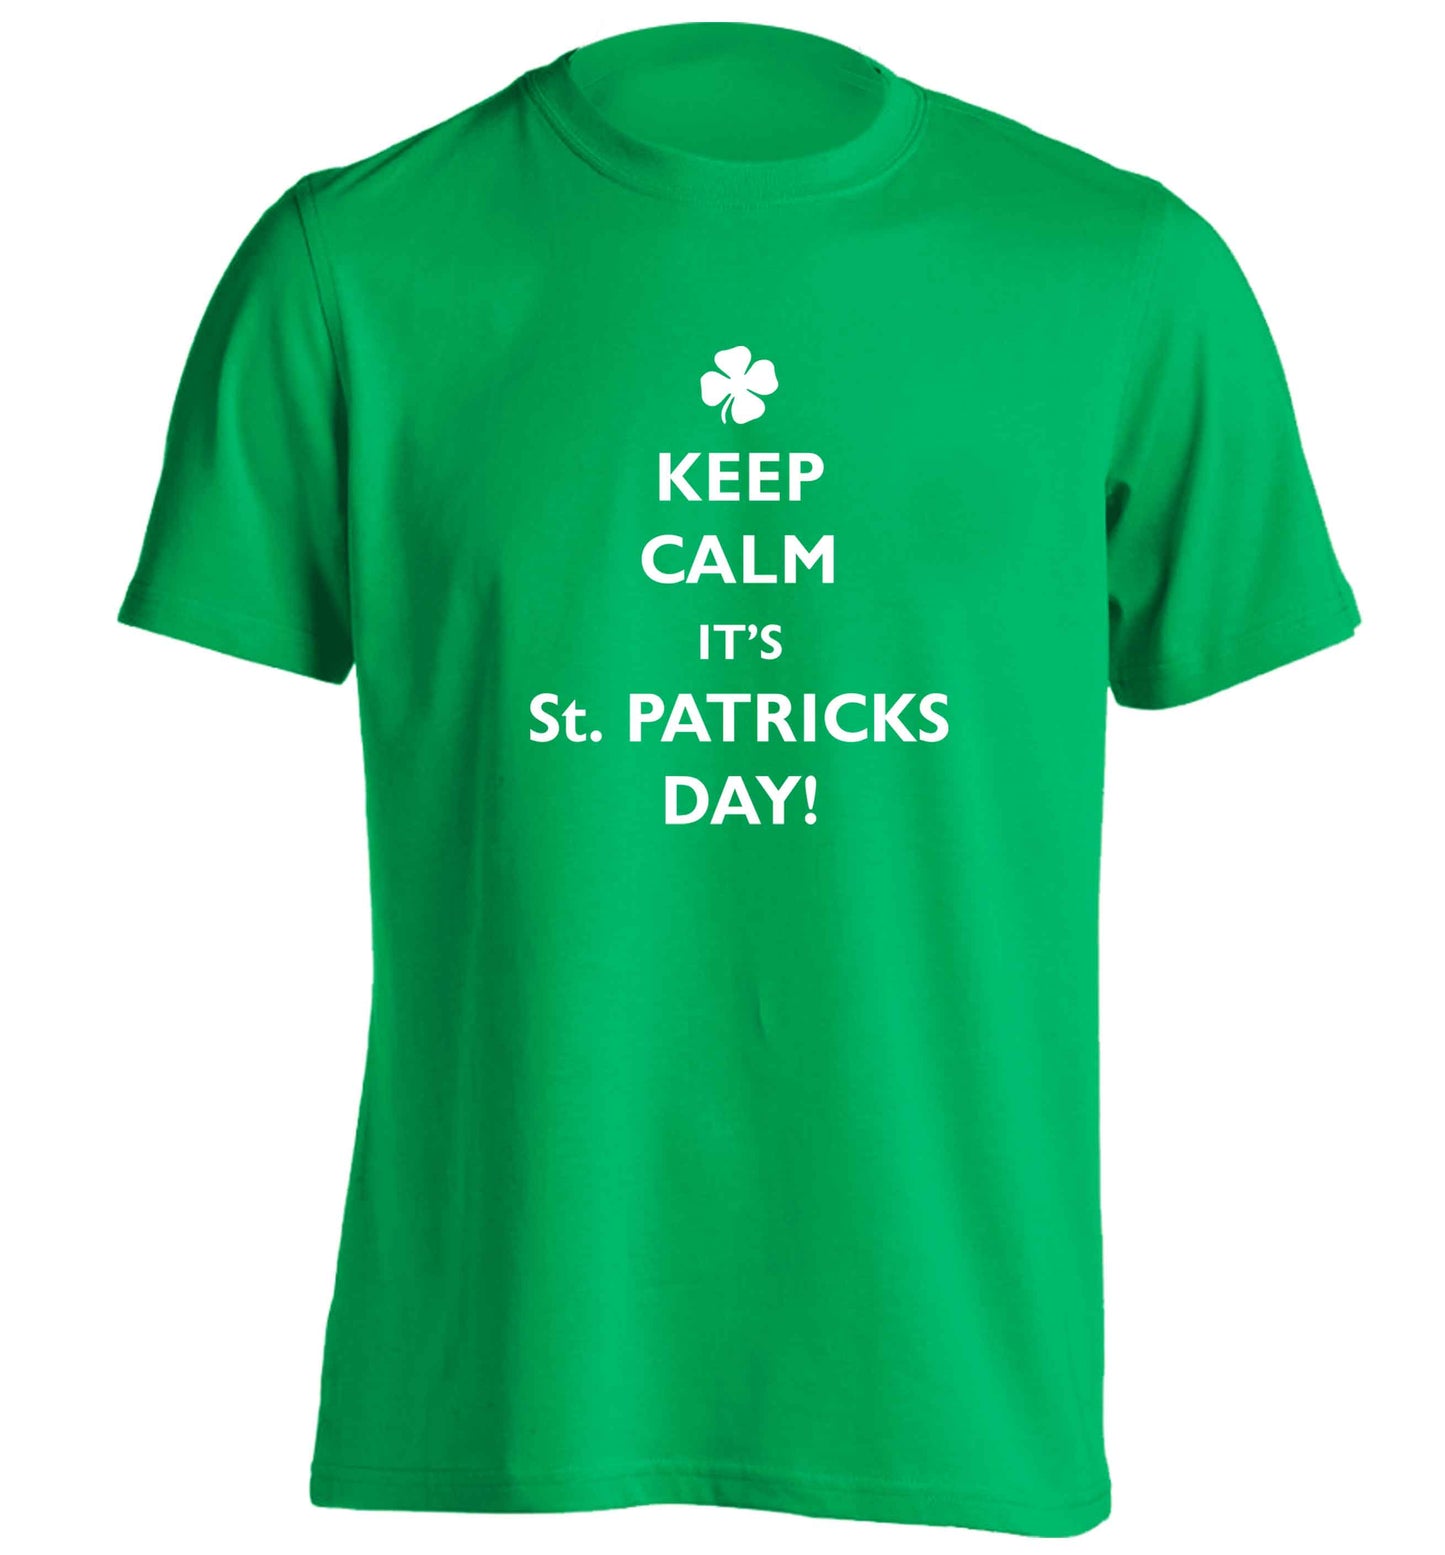 I can't keep calm it's St.Patricks day adults unisex green Tshirt 2XL